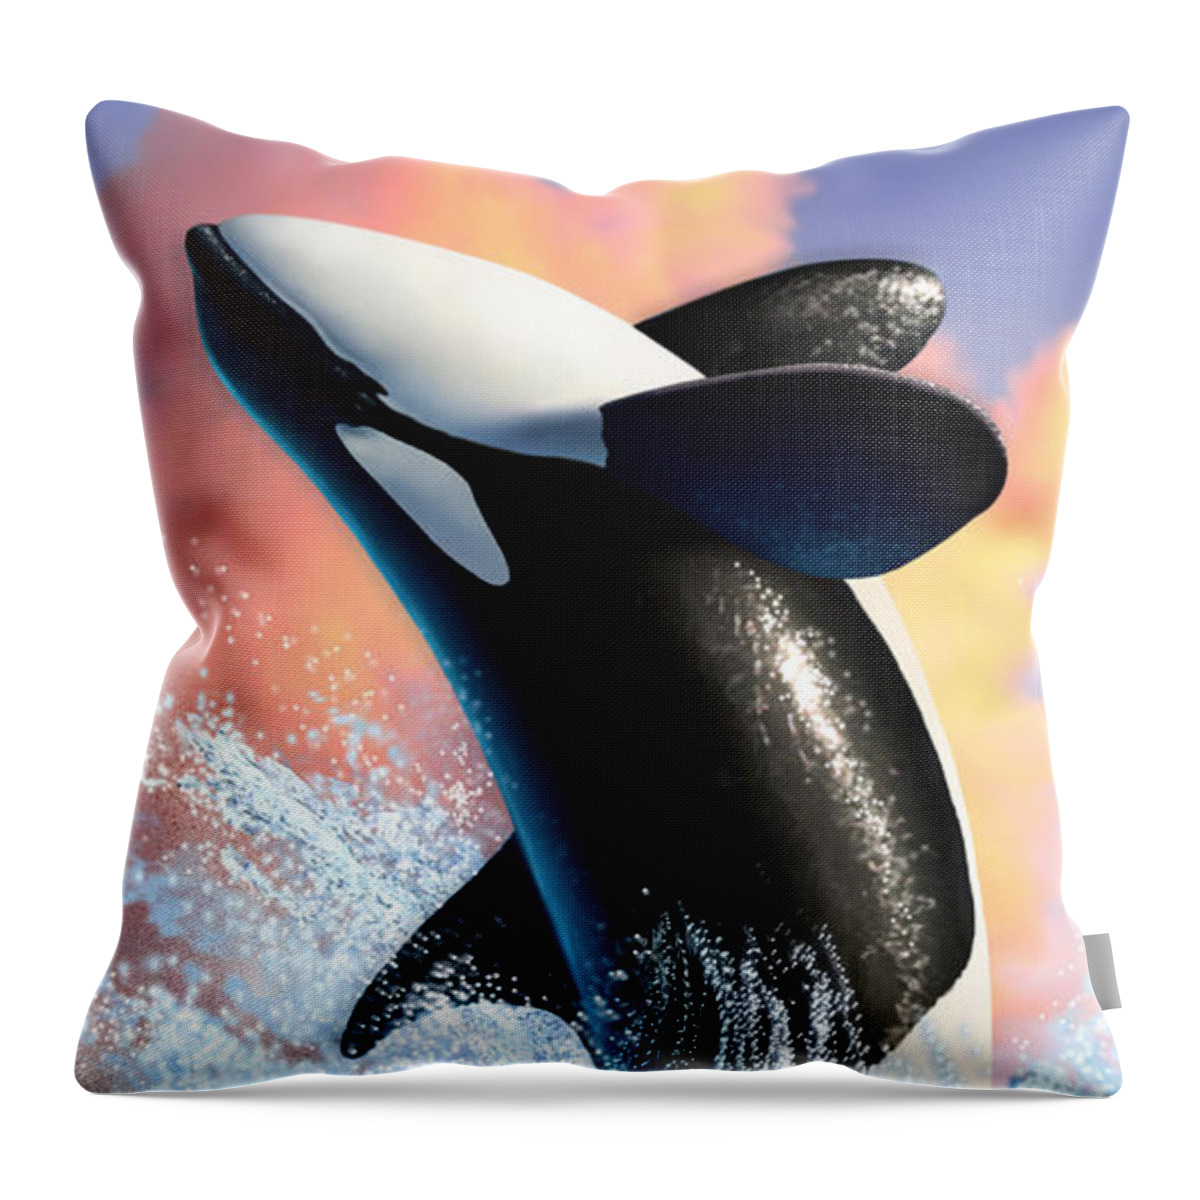 Orca Throw Pillow featuring the digital art Orca 1 by Jerry LoFaro